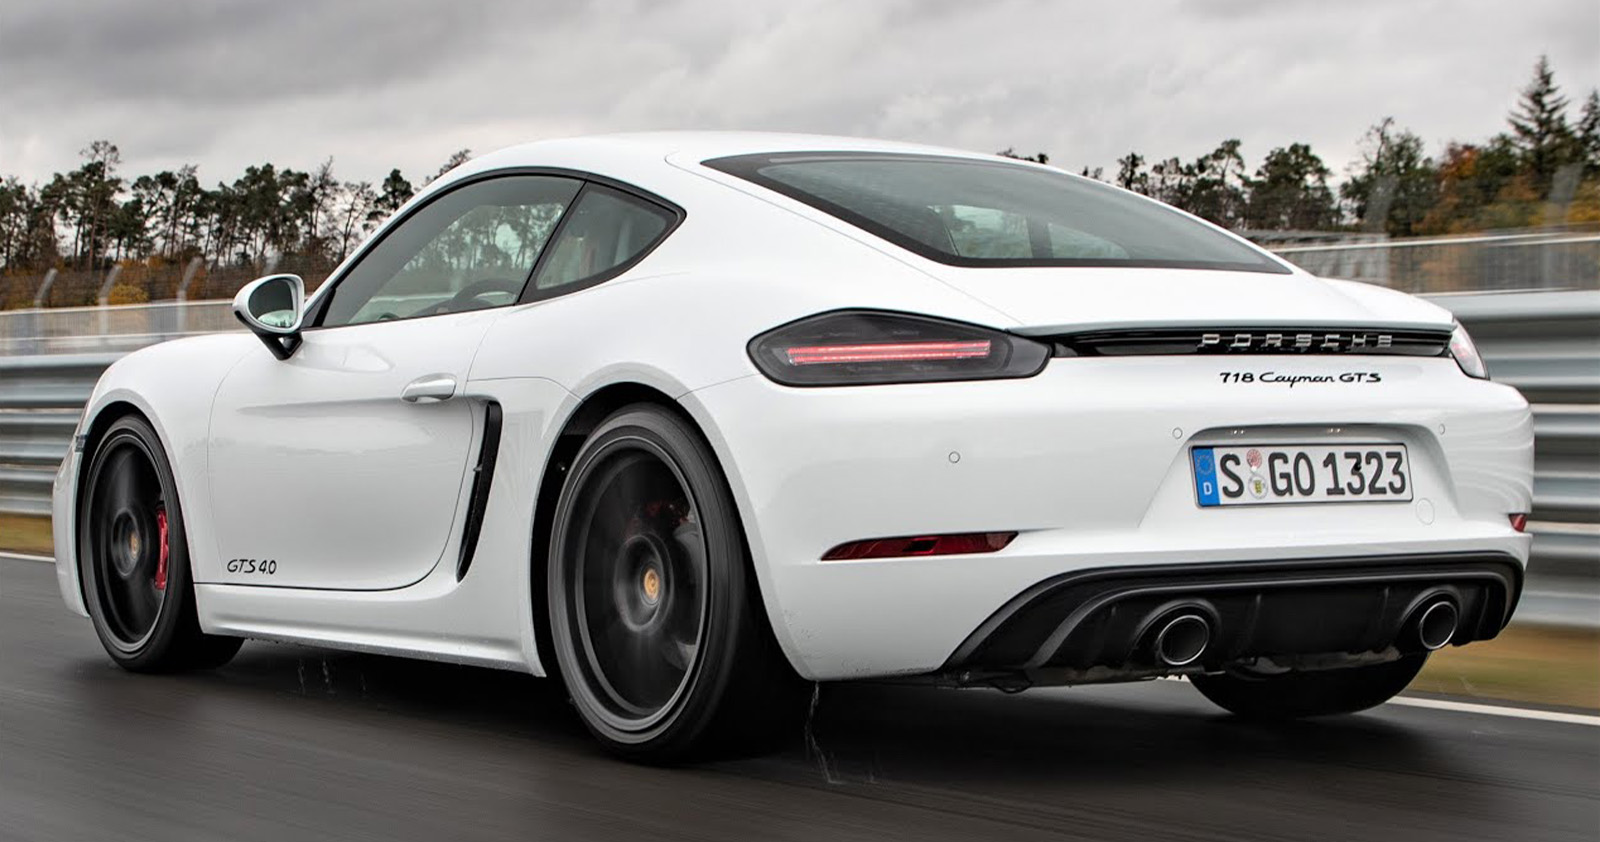 Rear end of a white Porsche 718 Cayman GTS on a track